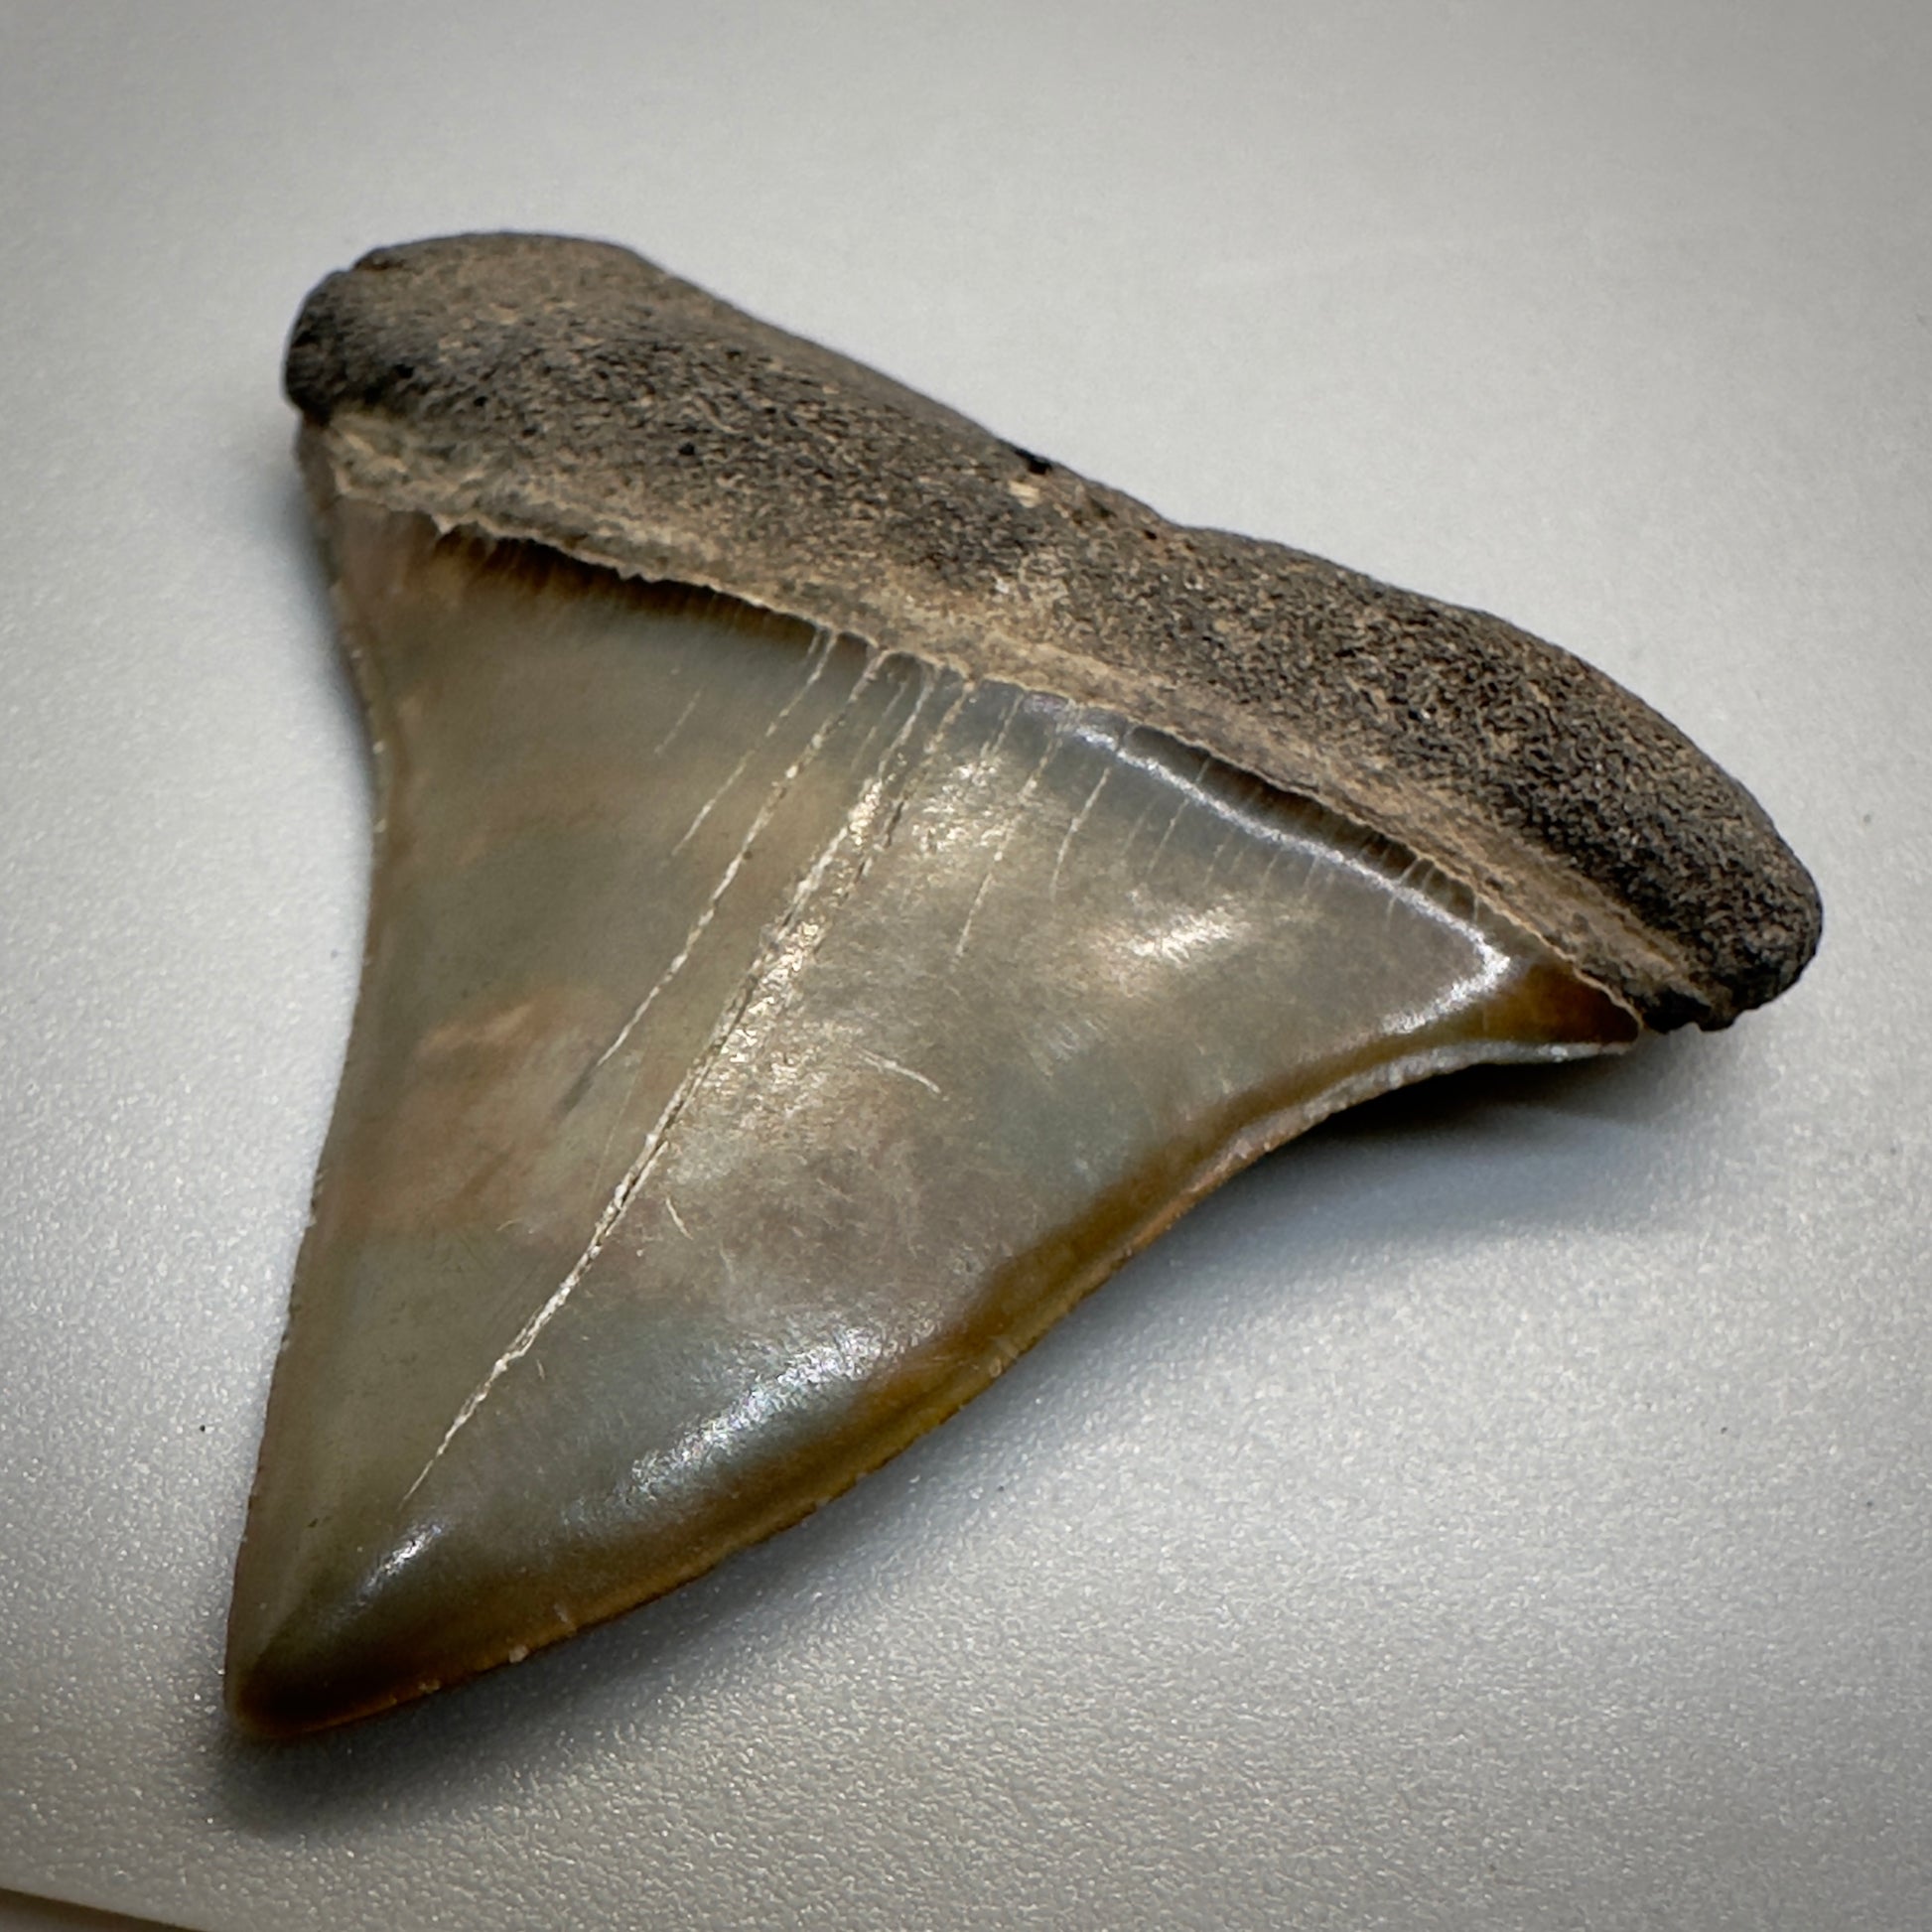 1.74 inches colorful Extinct Mako - isurus hastalis shark tooth from southeast, USA M511 front right